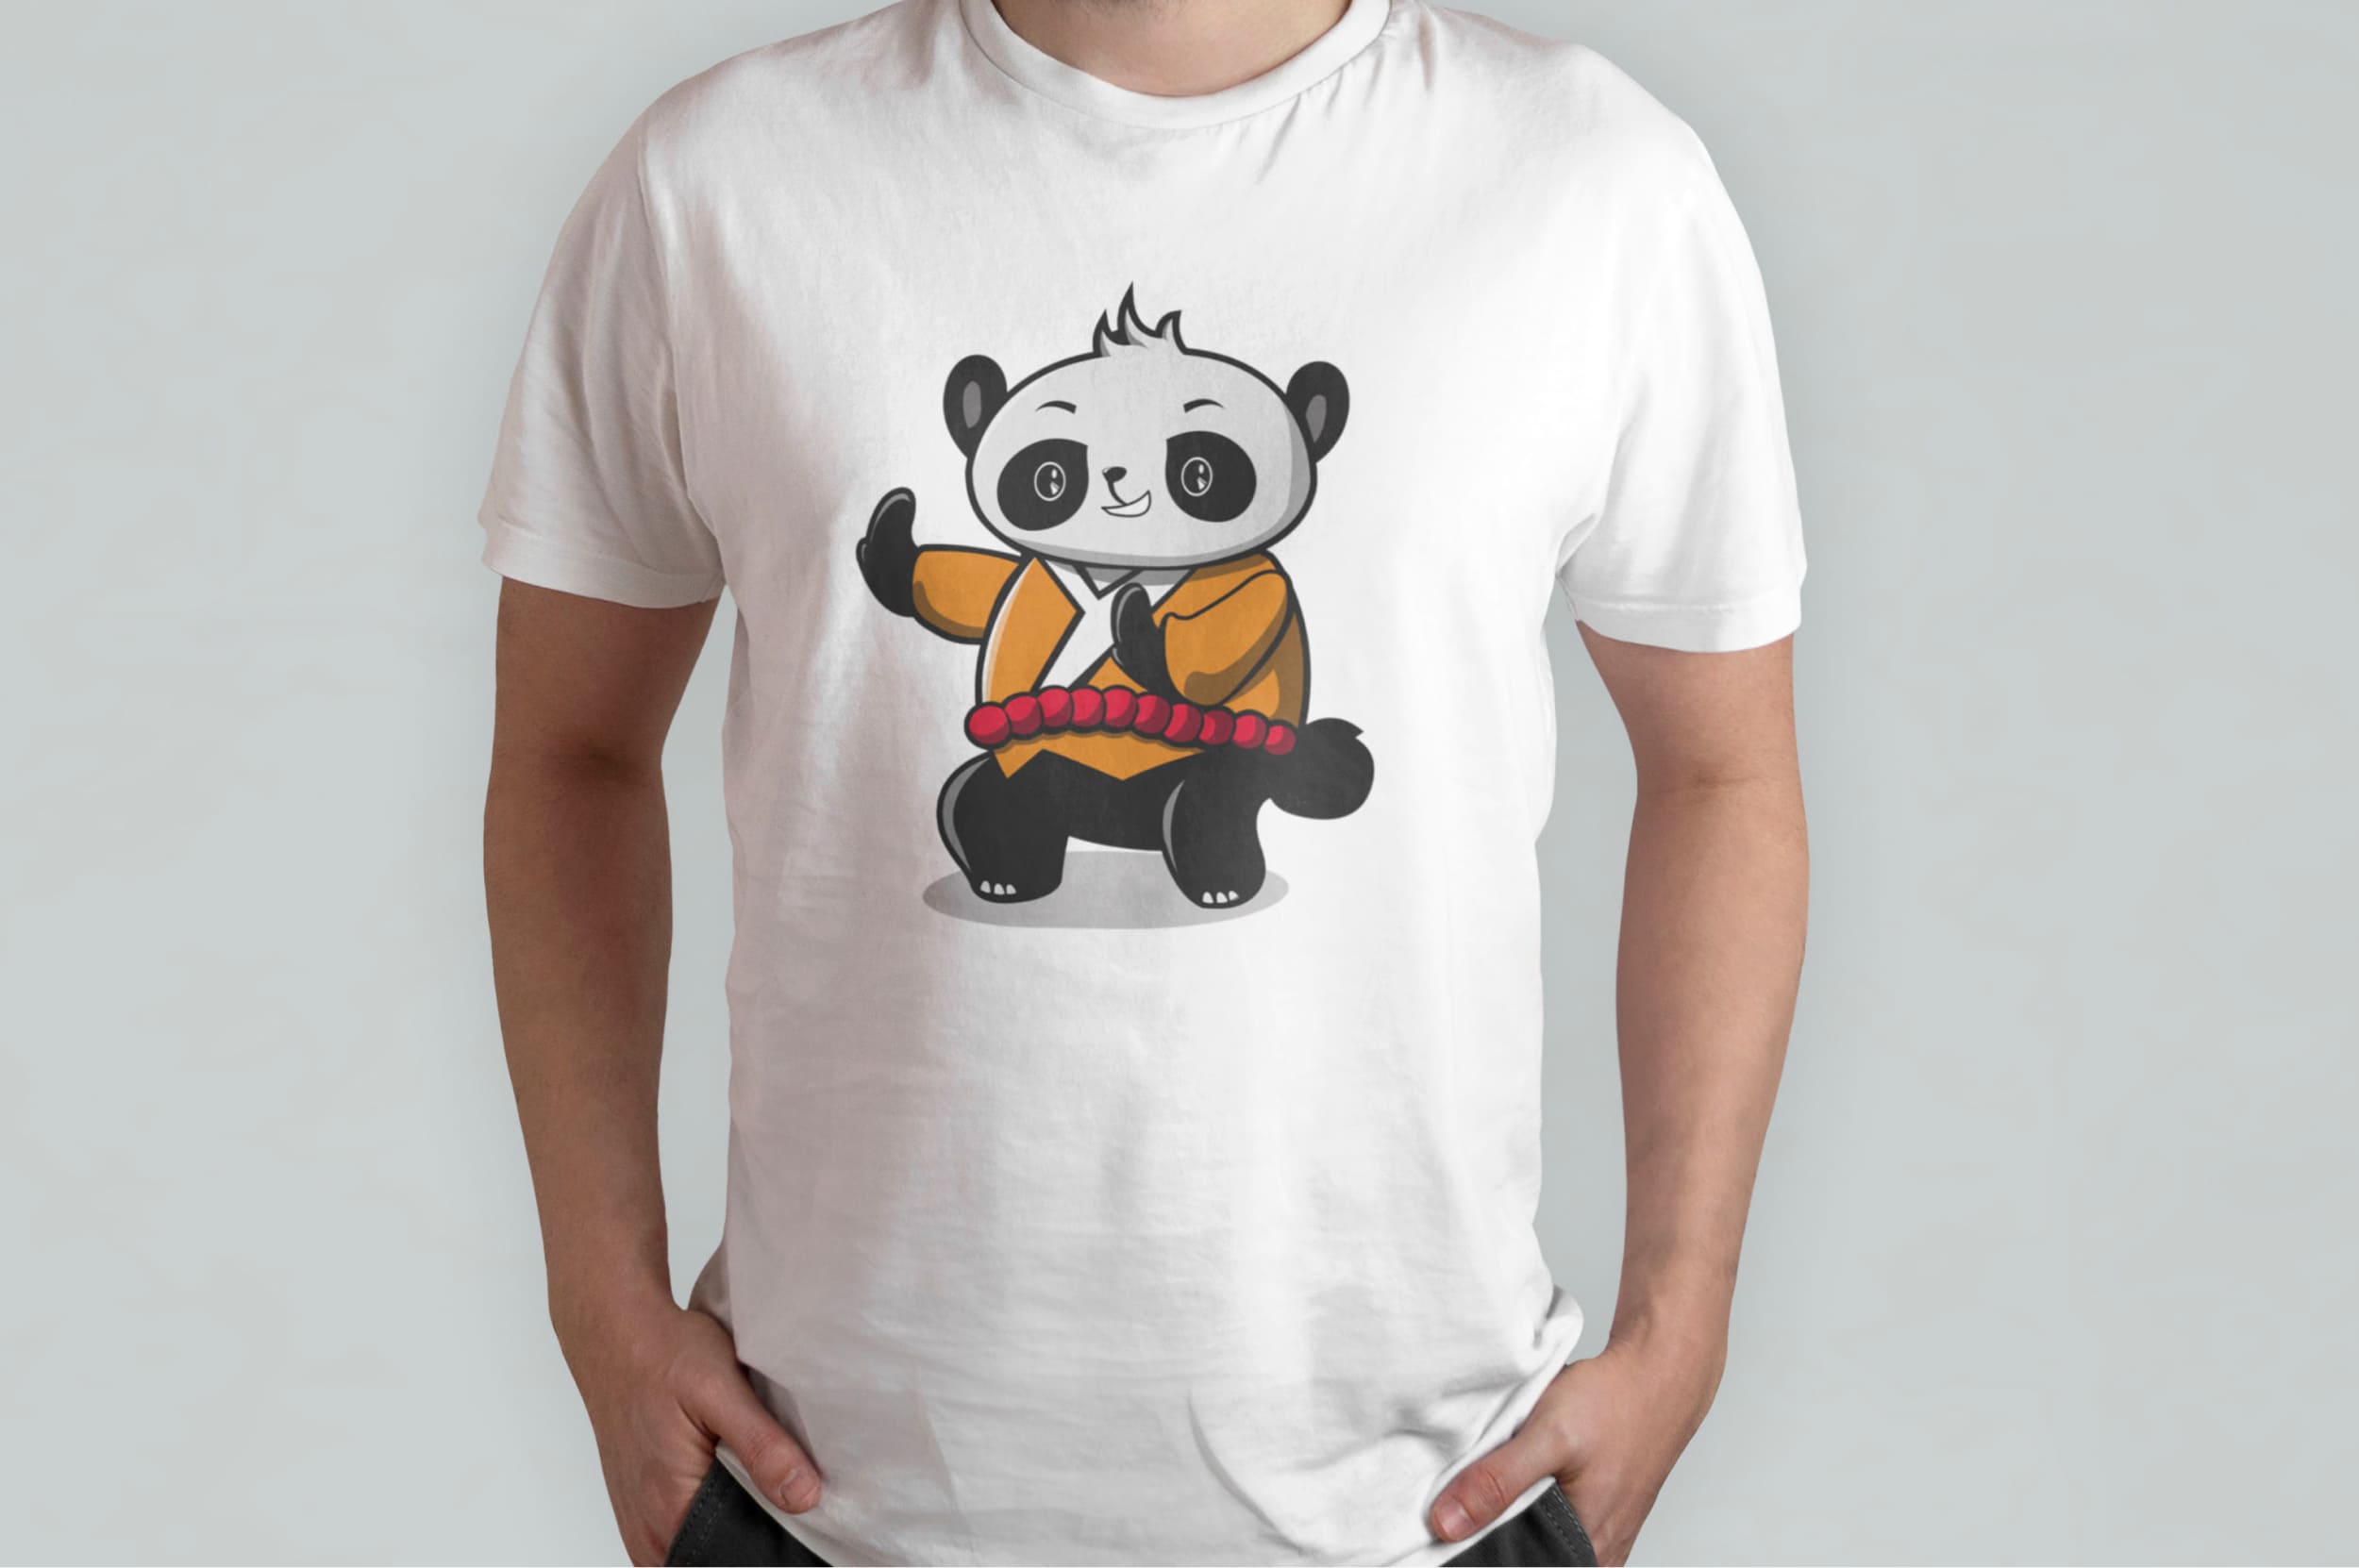 White t-shirt with kung fu panda on a man on a gray background.